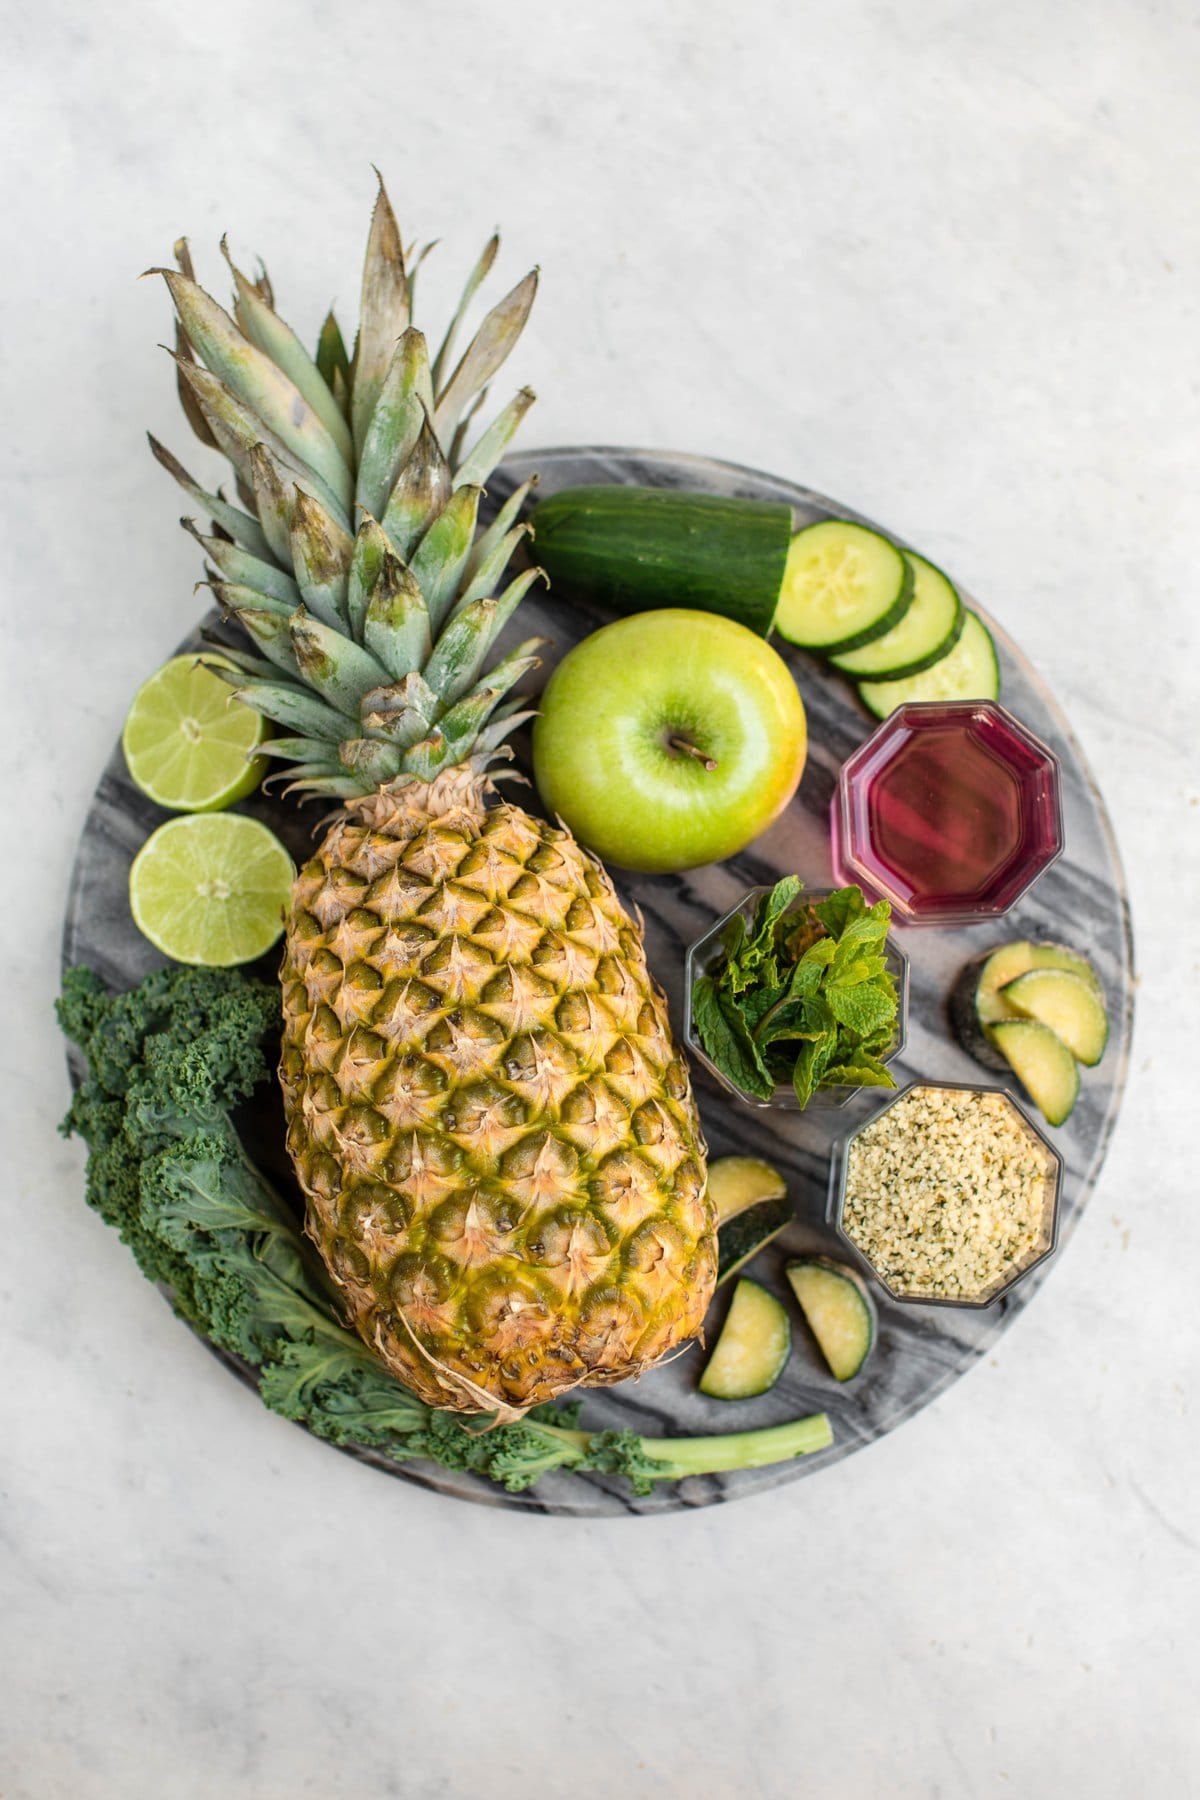 ingredients for pineapple mint smoothie on gray marble cutting board